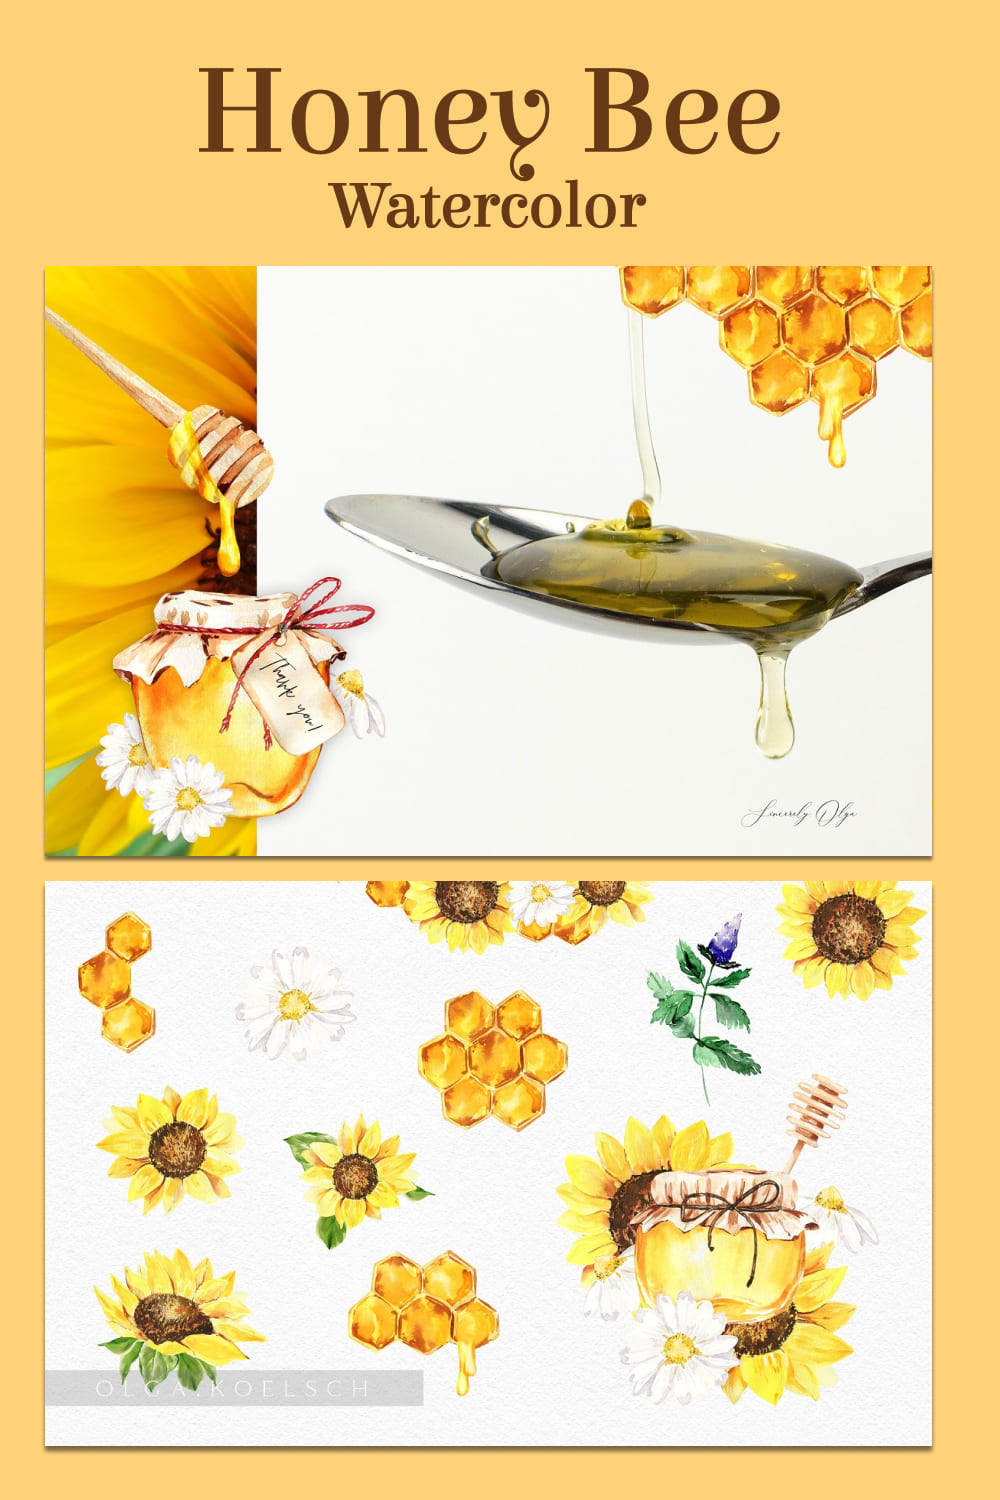 Honey bee watercolor - pinterest image preview.